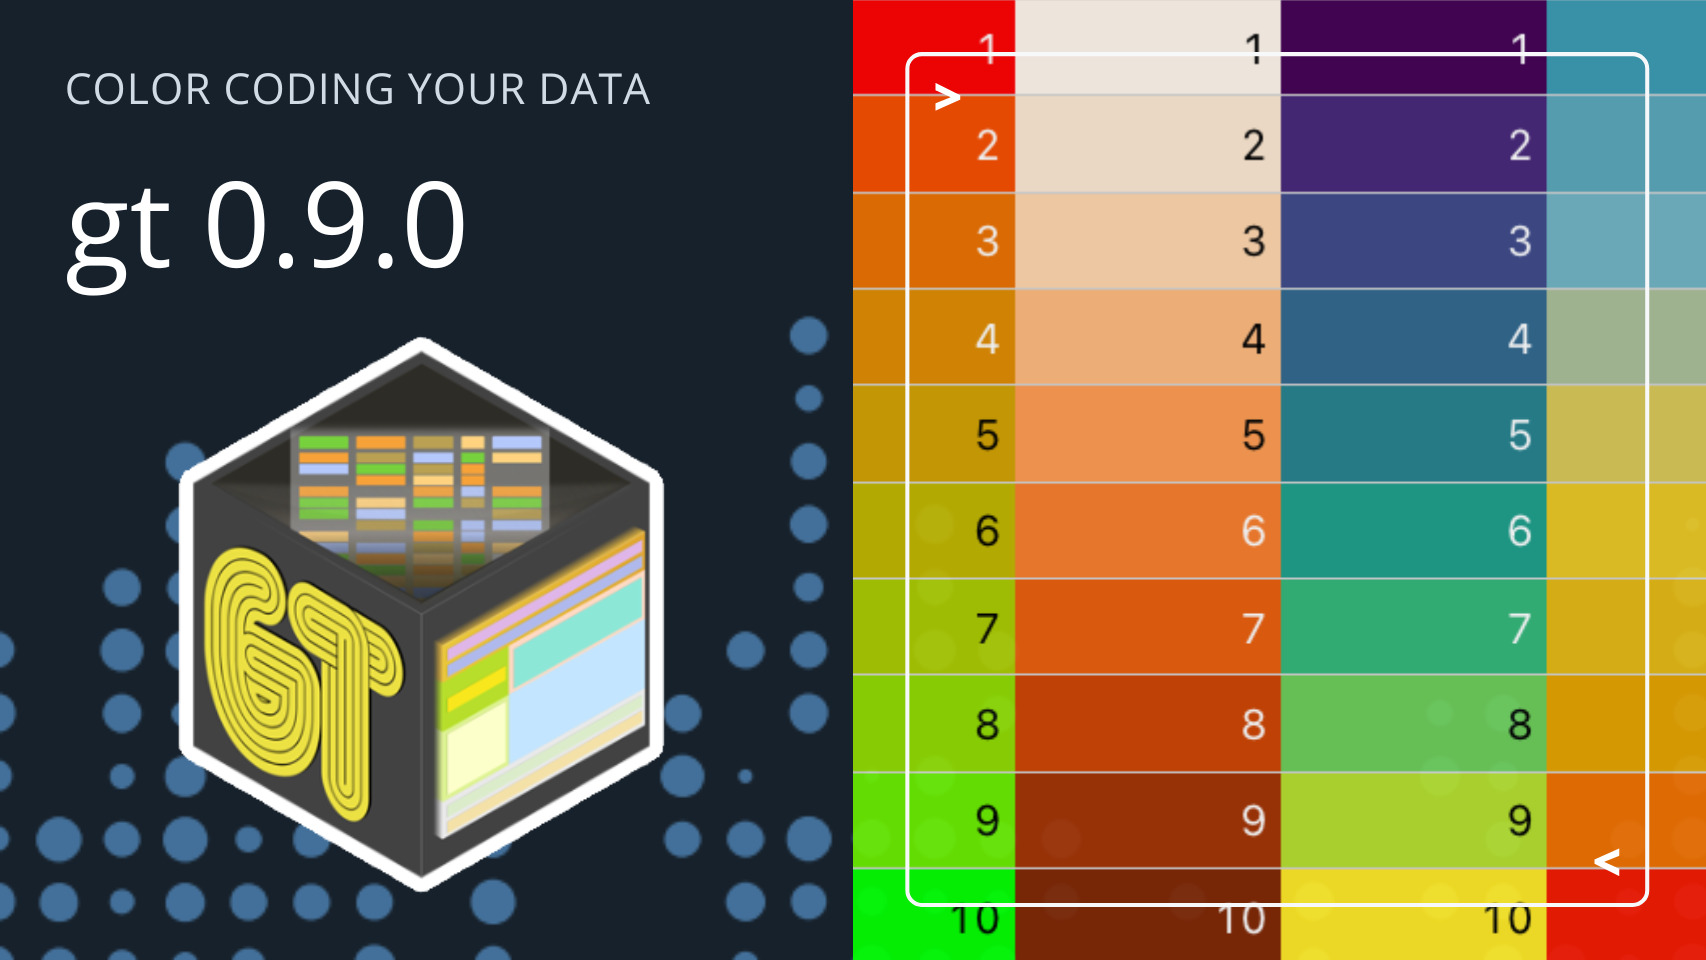 Text: "Color coding your data, gt 0.9.0" and the gt hex sticker on the left, a table with cells of different colors on the right.